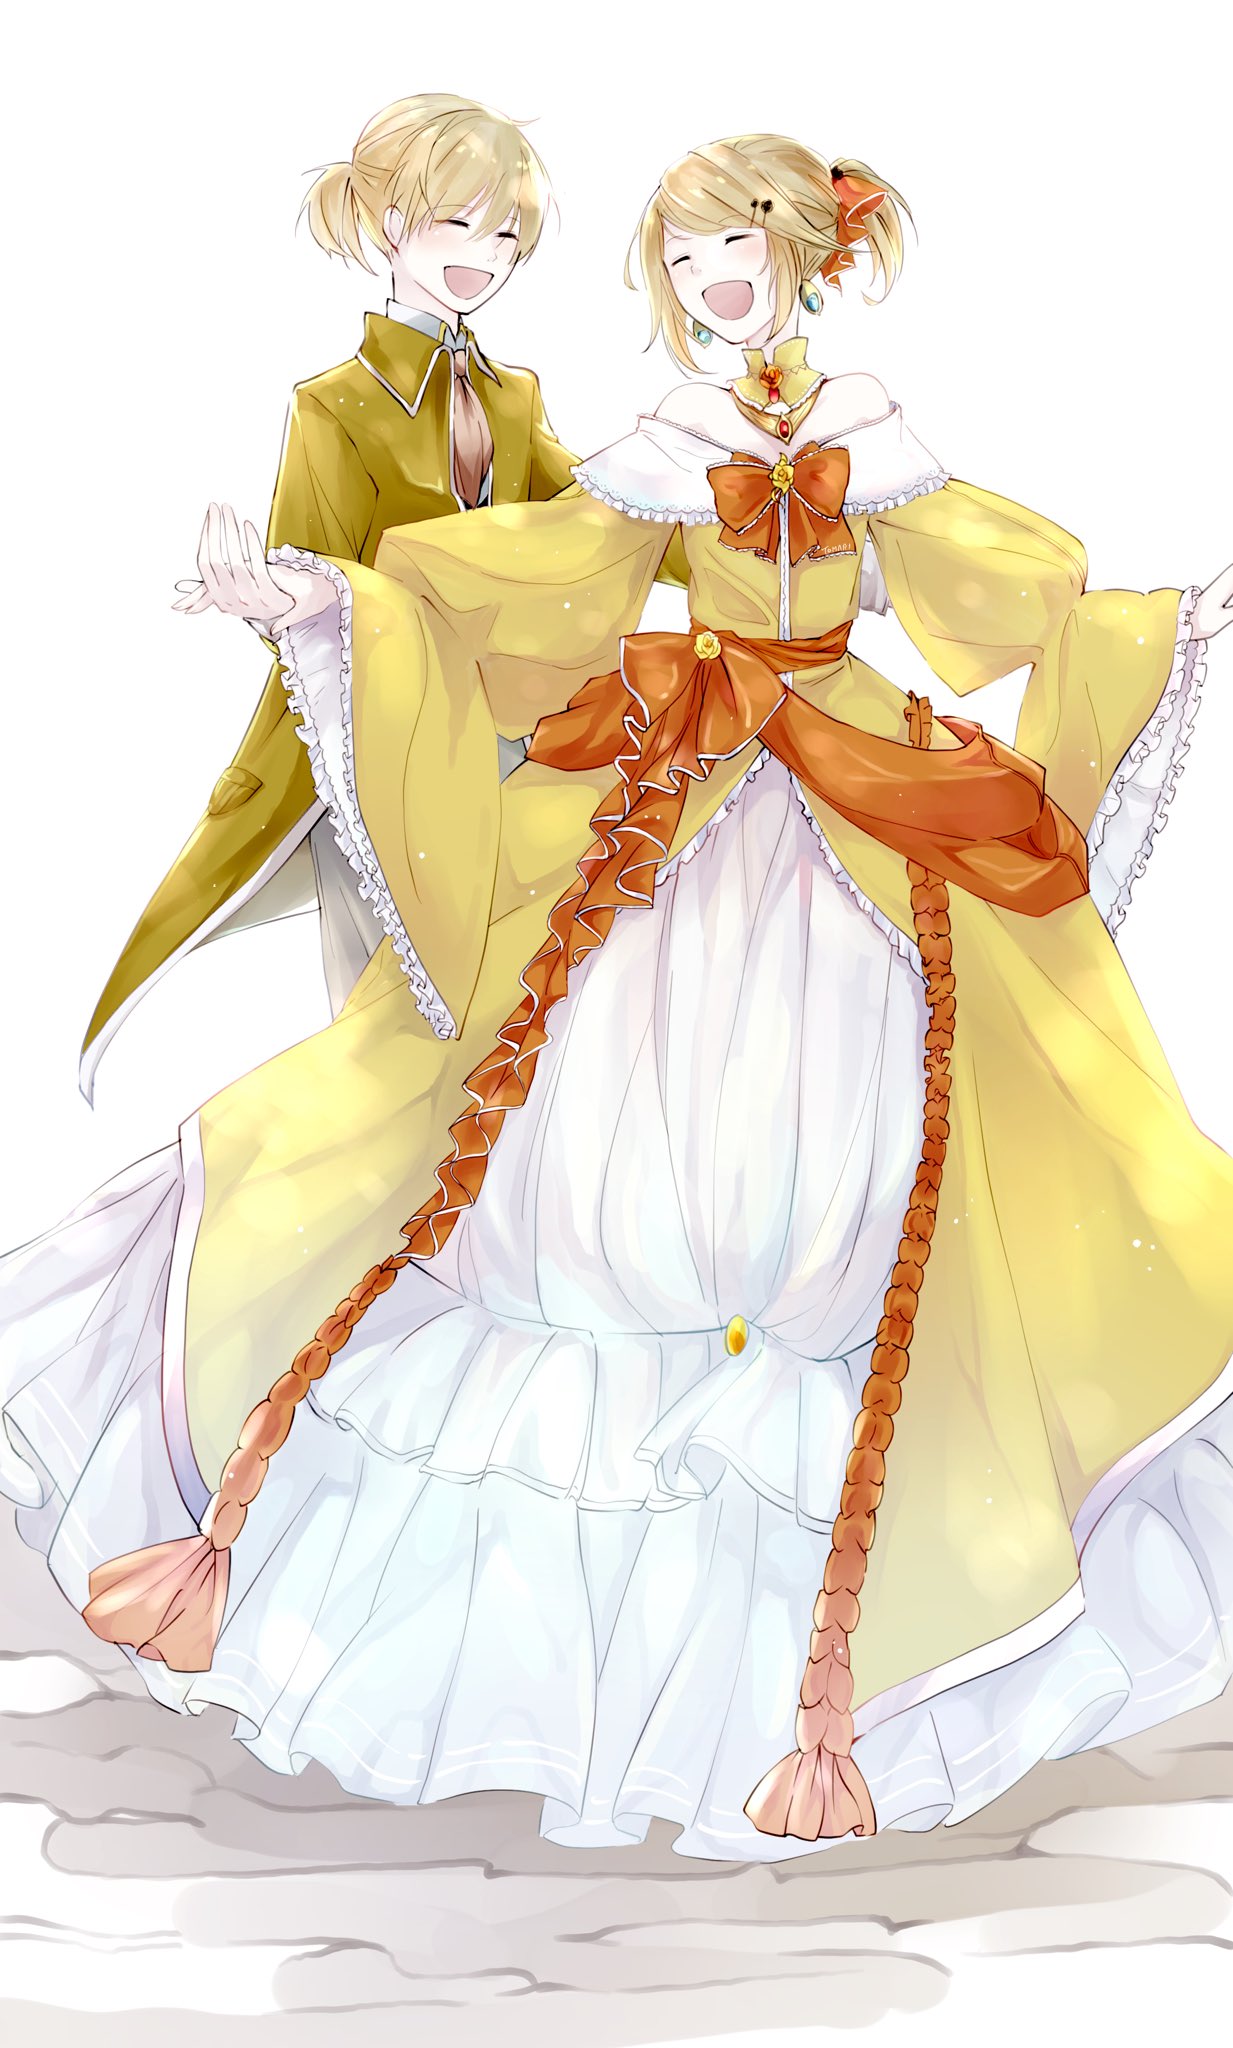 1boy 1girl aku_no_meshitsukai_(vocaloid) aku_no_musume_(vocaloid) allen_avadonia ascot backlighting bare_shoulders blonde_hair bow brooch brother_and_sister choker closed_eyes dress dress_bow dress_flower earrings evillious_nendaiki flat_chest flower frilled_choker frilled_dress frilled_sleeves frills hair_ornament hairclip happy highres holding jacket jewelry kagamine_len kagamine_rin long_sleeves open_mouth orange_bow pale_skin petticoat riliane_lucifen_d'autriche rose short_ponytail siblings smile tomari_drew twins vocaloid white_background wide_sleeves yellow_choker yellow_dress yellow_flower yellow_jacket yellow_rose